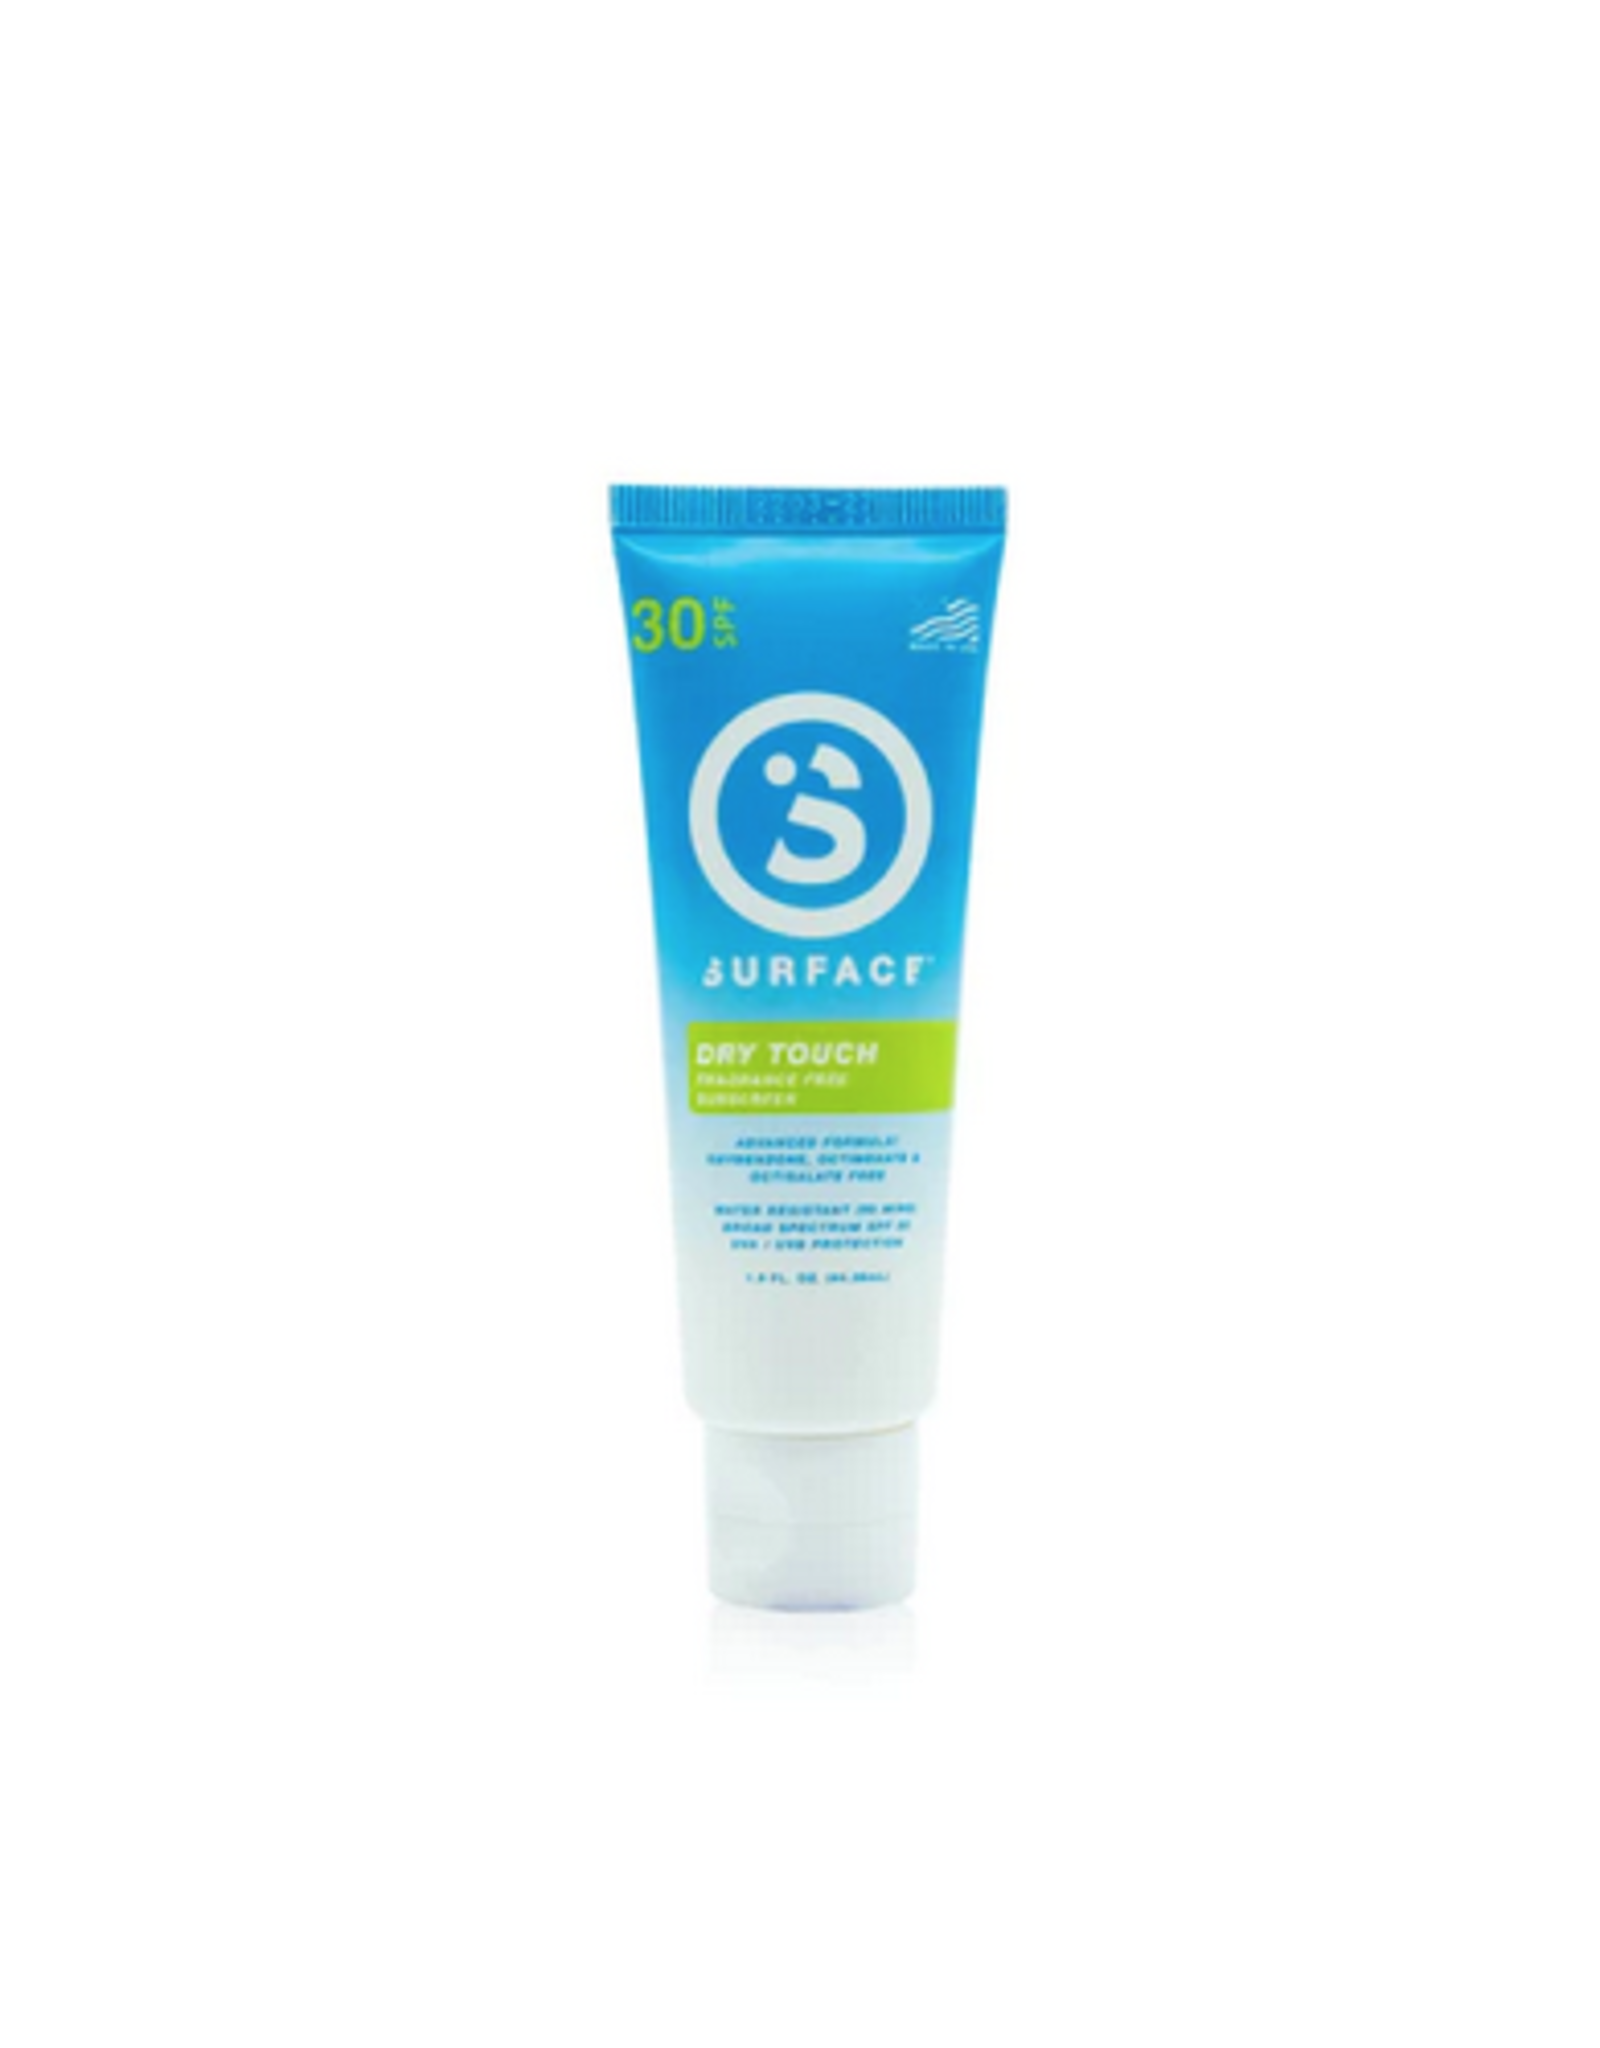 Surface Sunscreen Dry Touch Fragrance Free SPF30 1.5oz